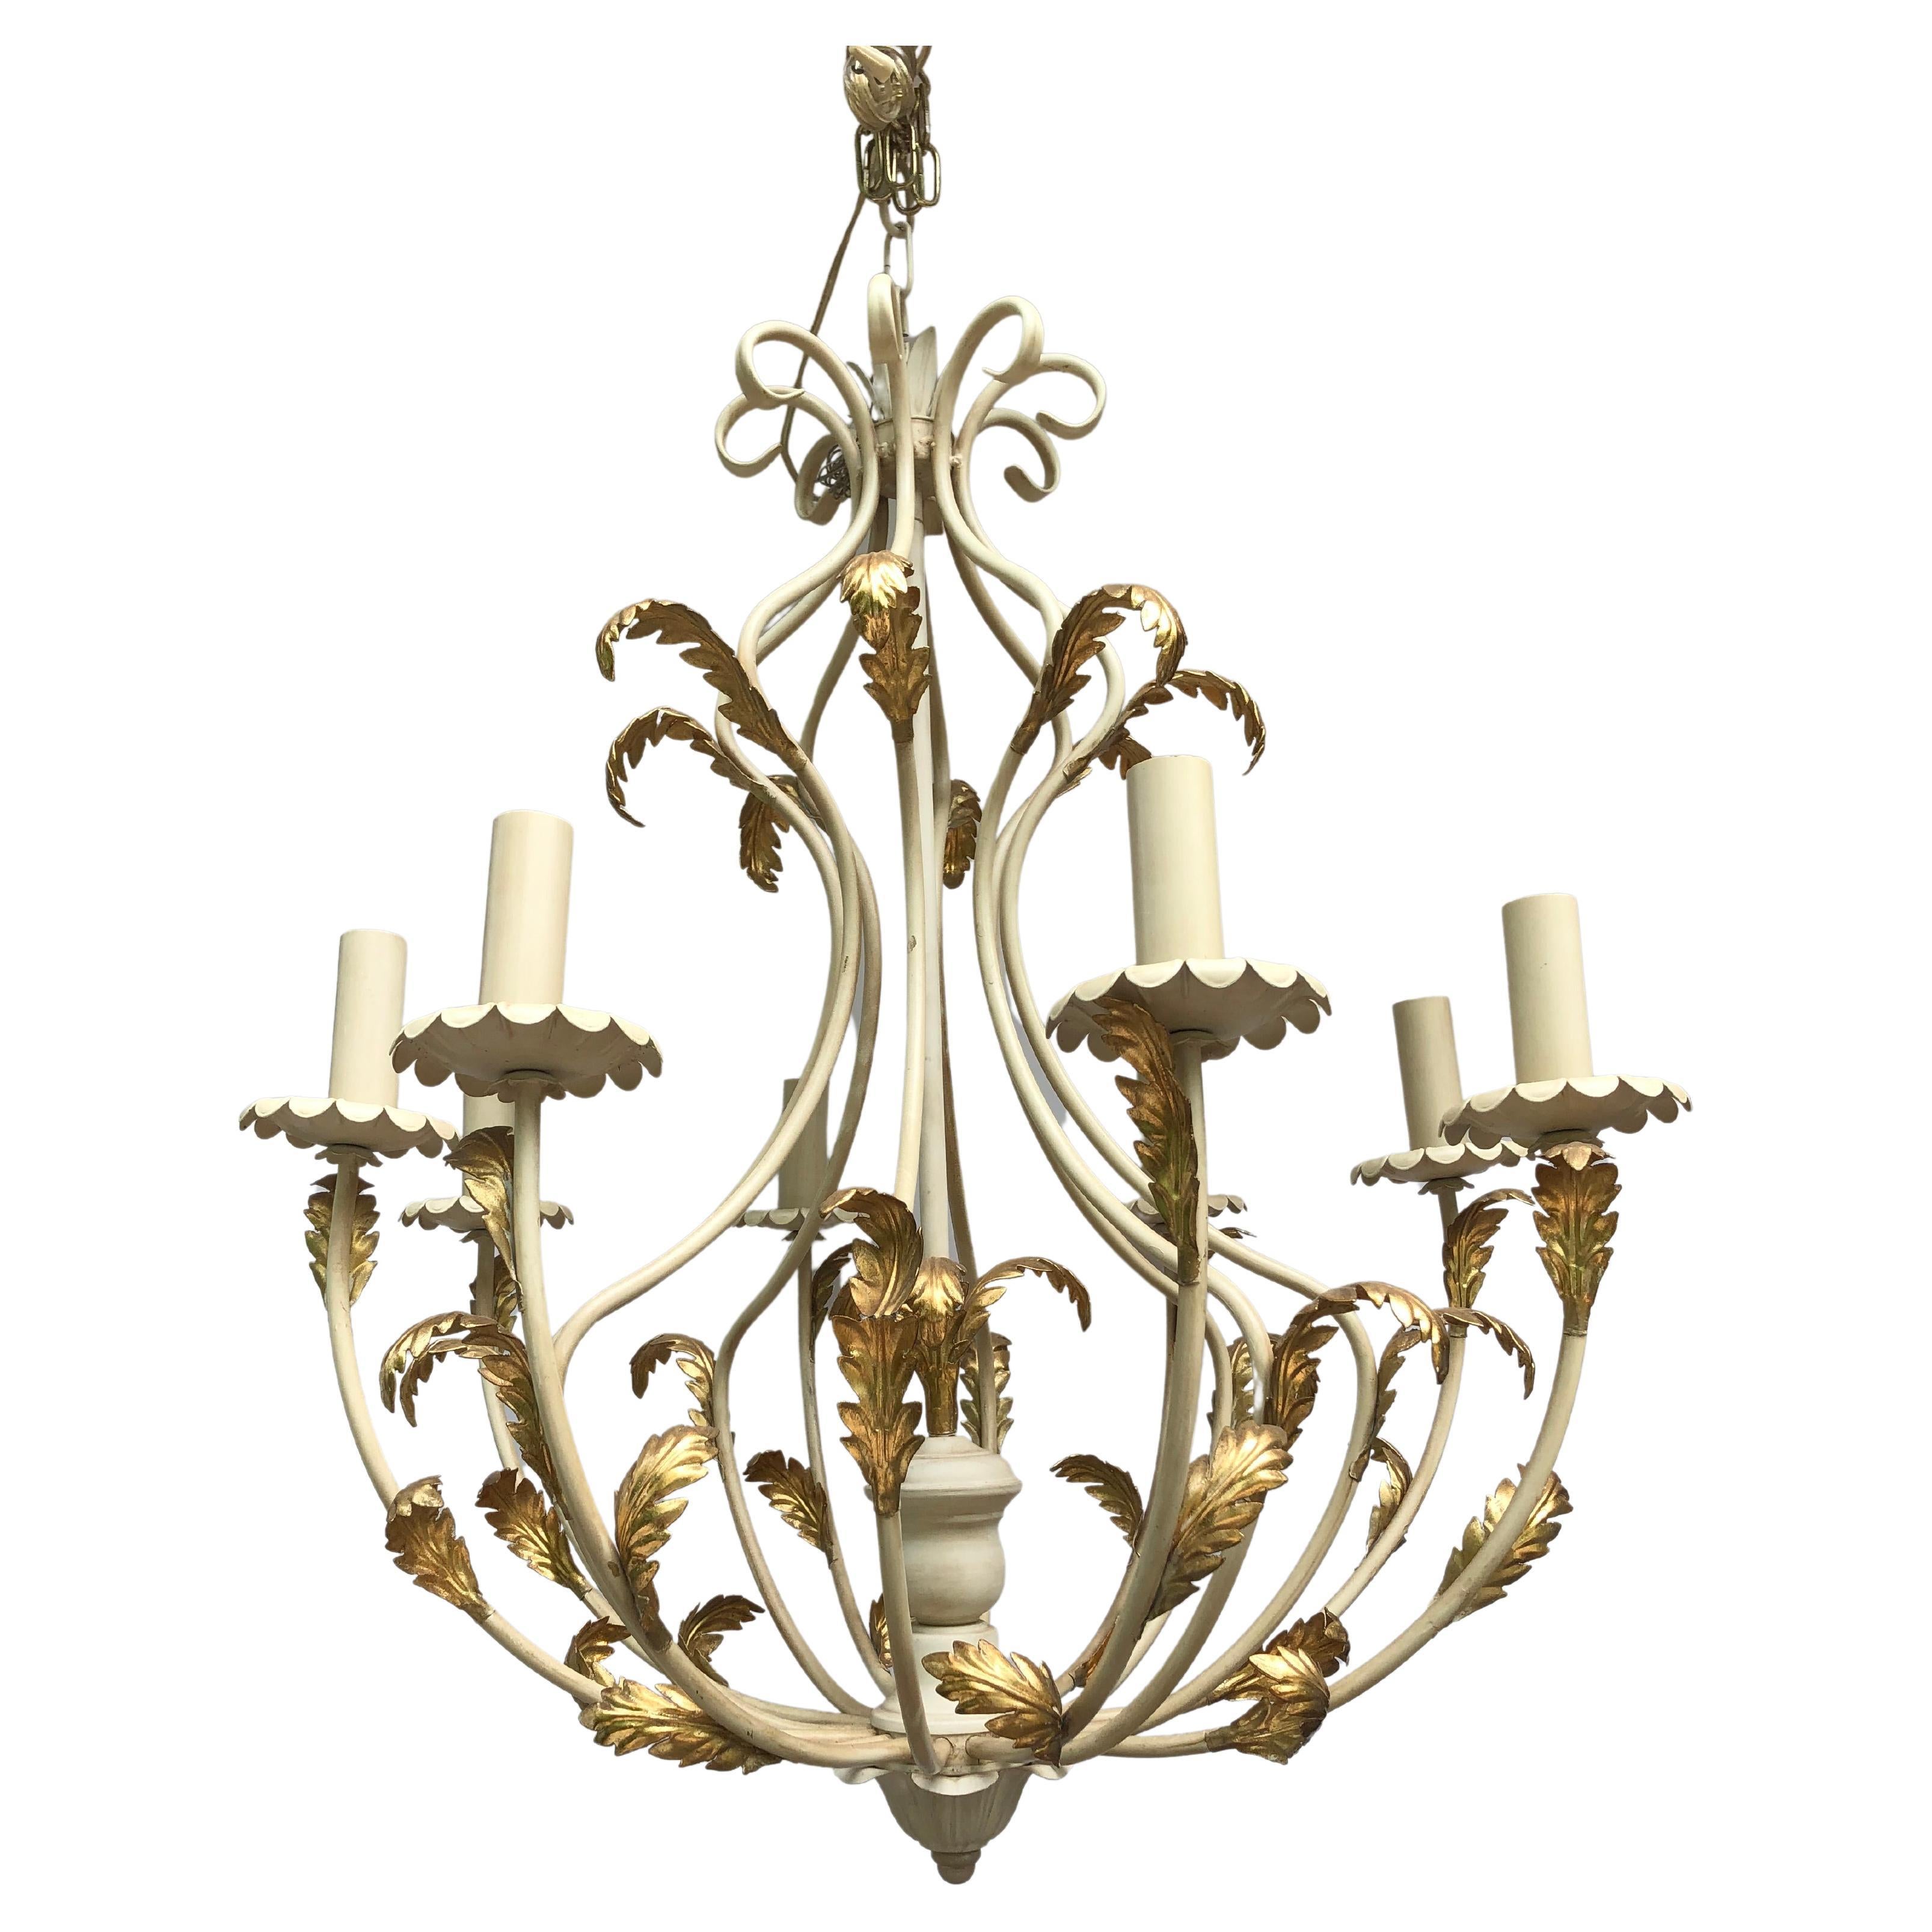 Lovely Large off White Painted Iron Italian Chandelier with Gold Leaves